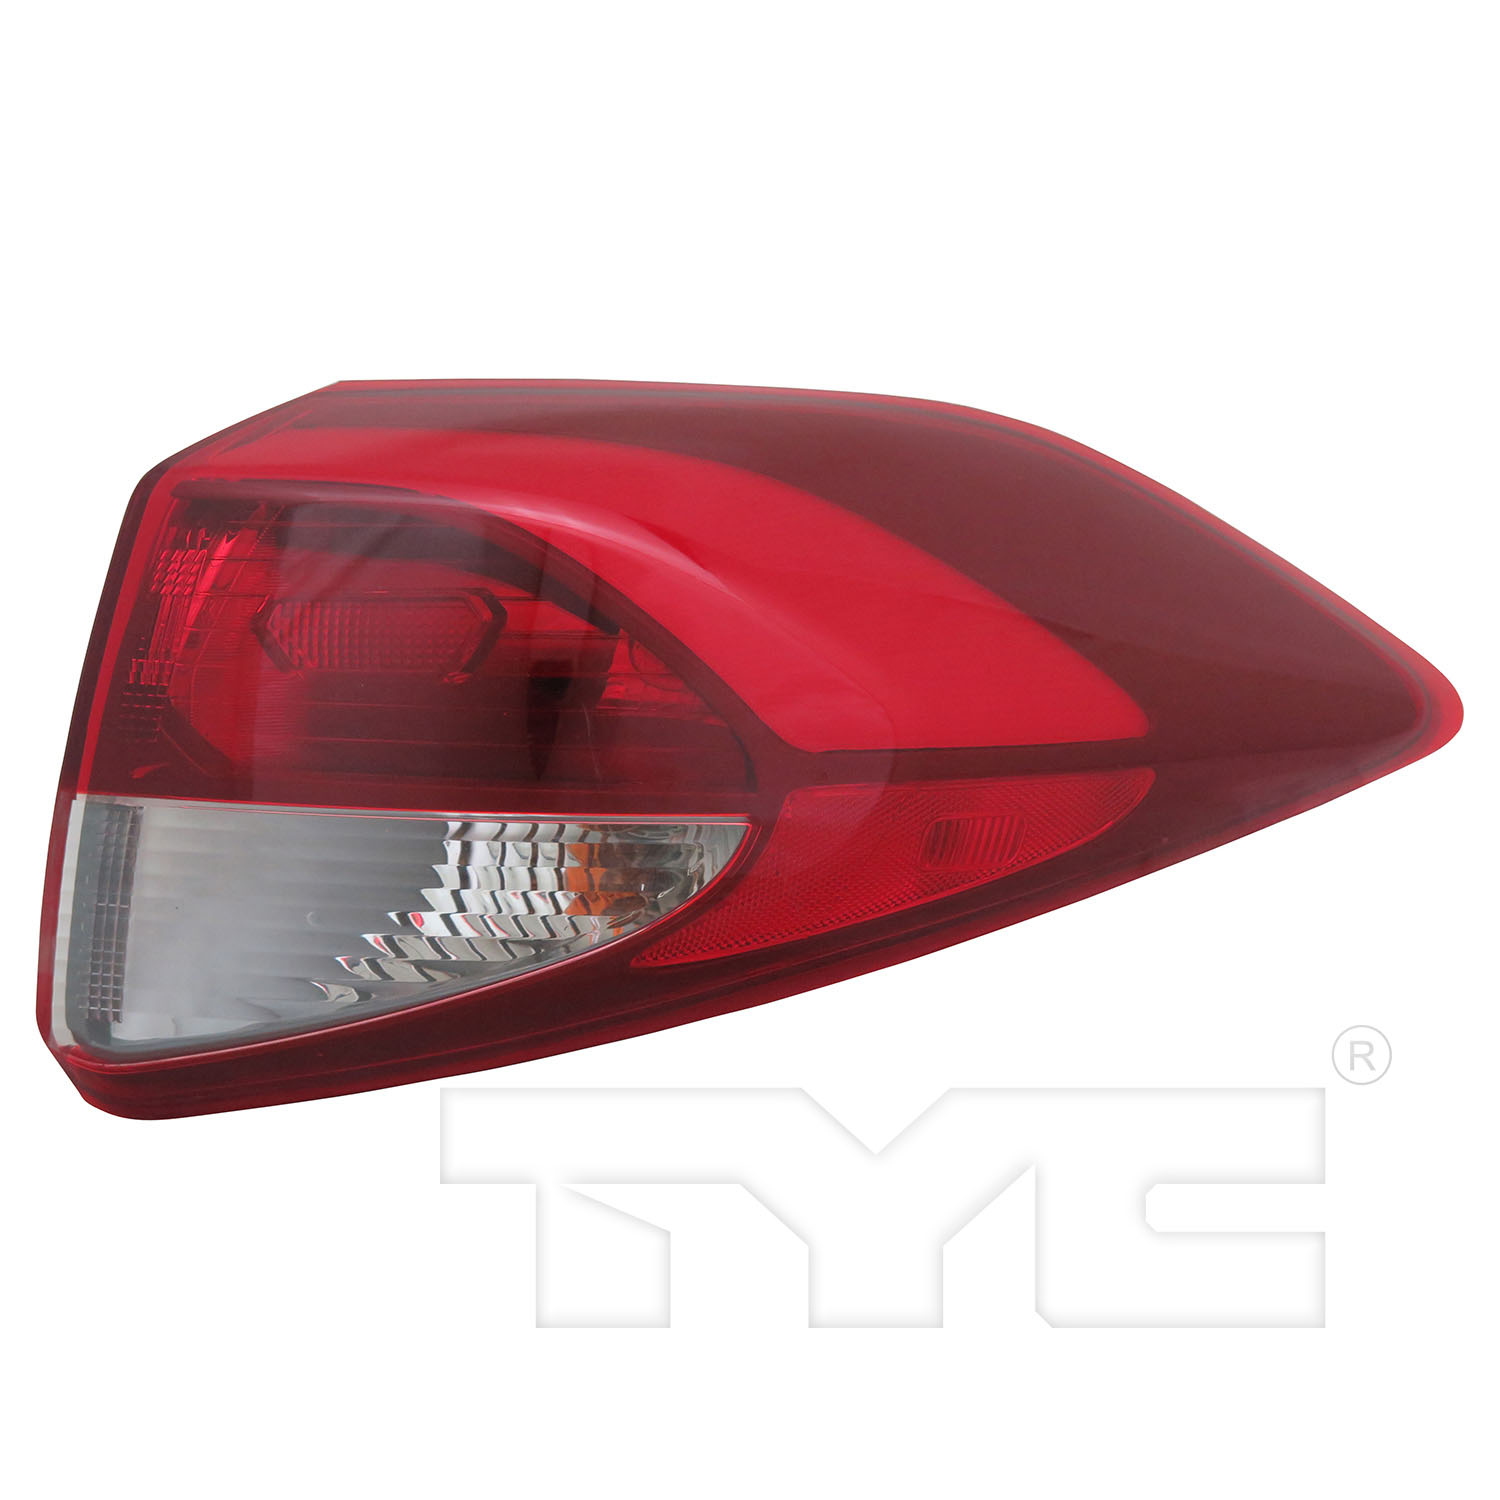 Aftermarket TAILLIGHTS for HYUNDAI - TUCSON, TUCSON,16-18,RT Taillamp assy outer